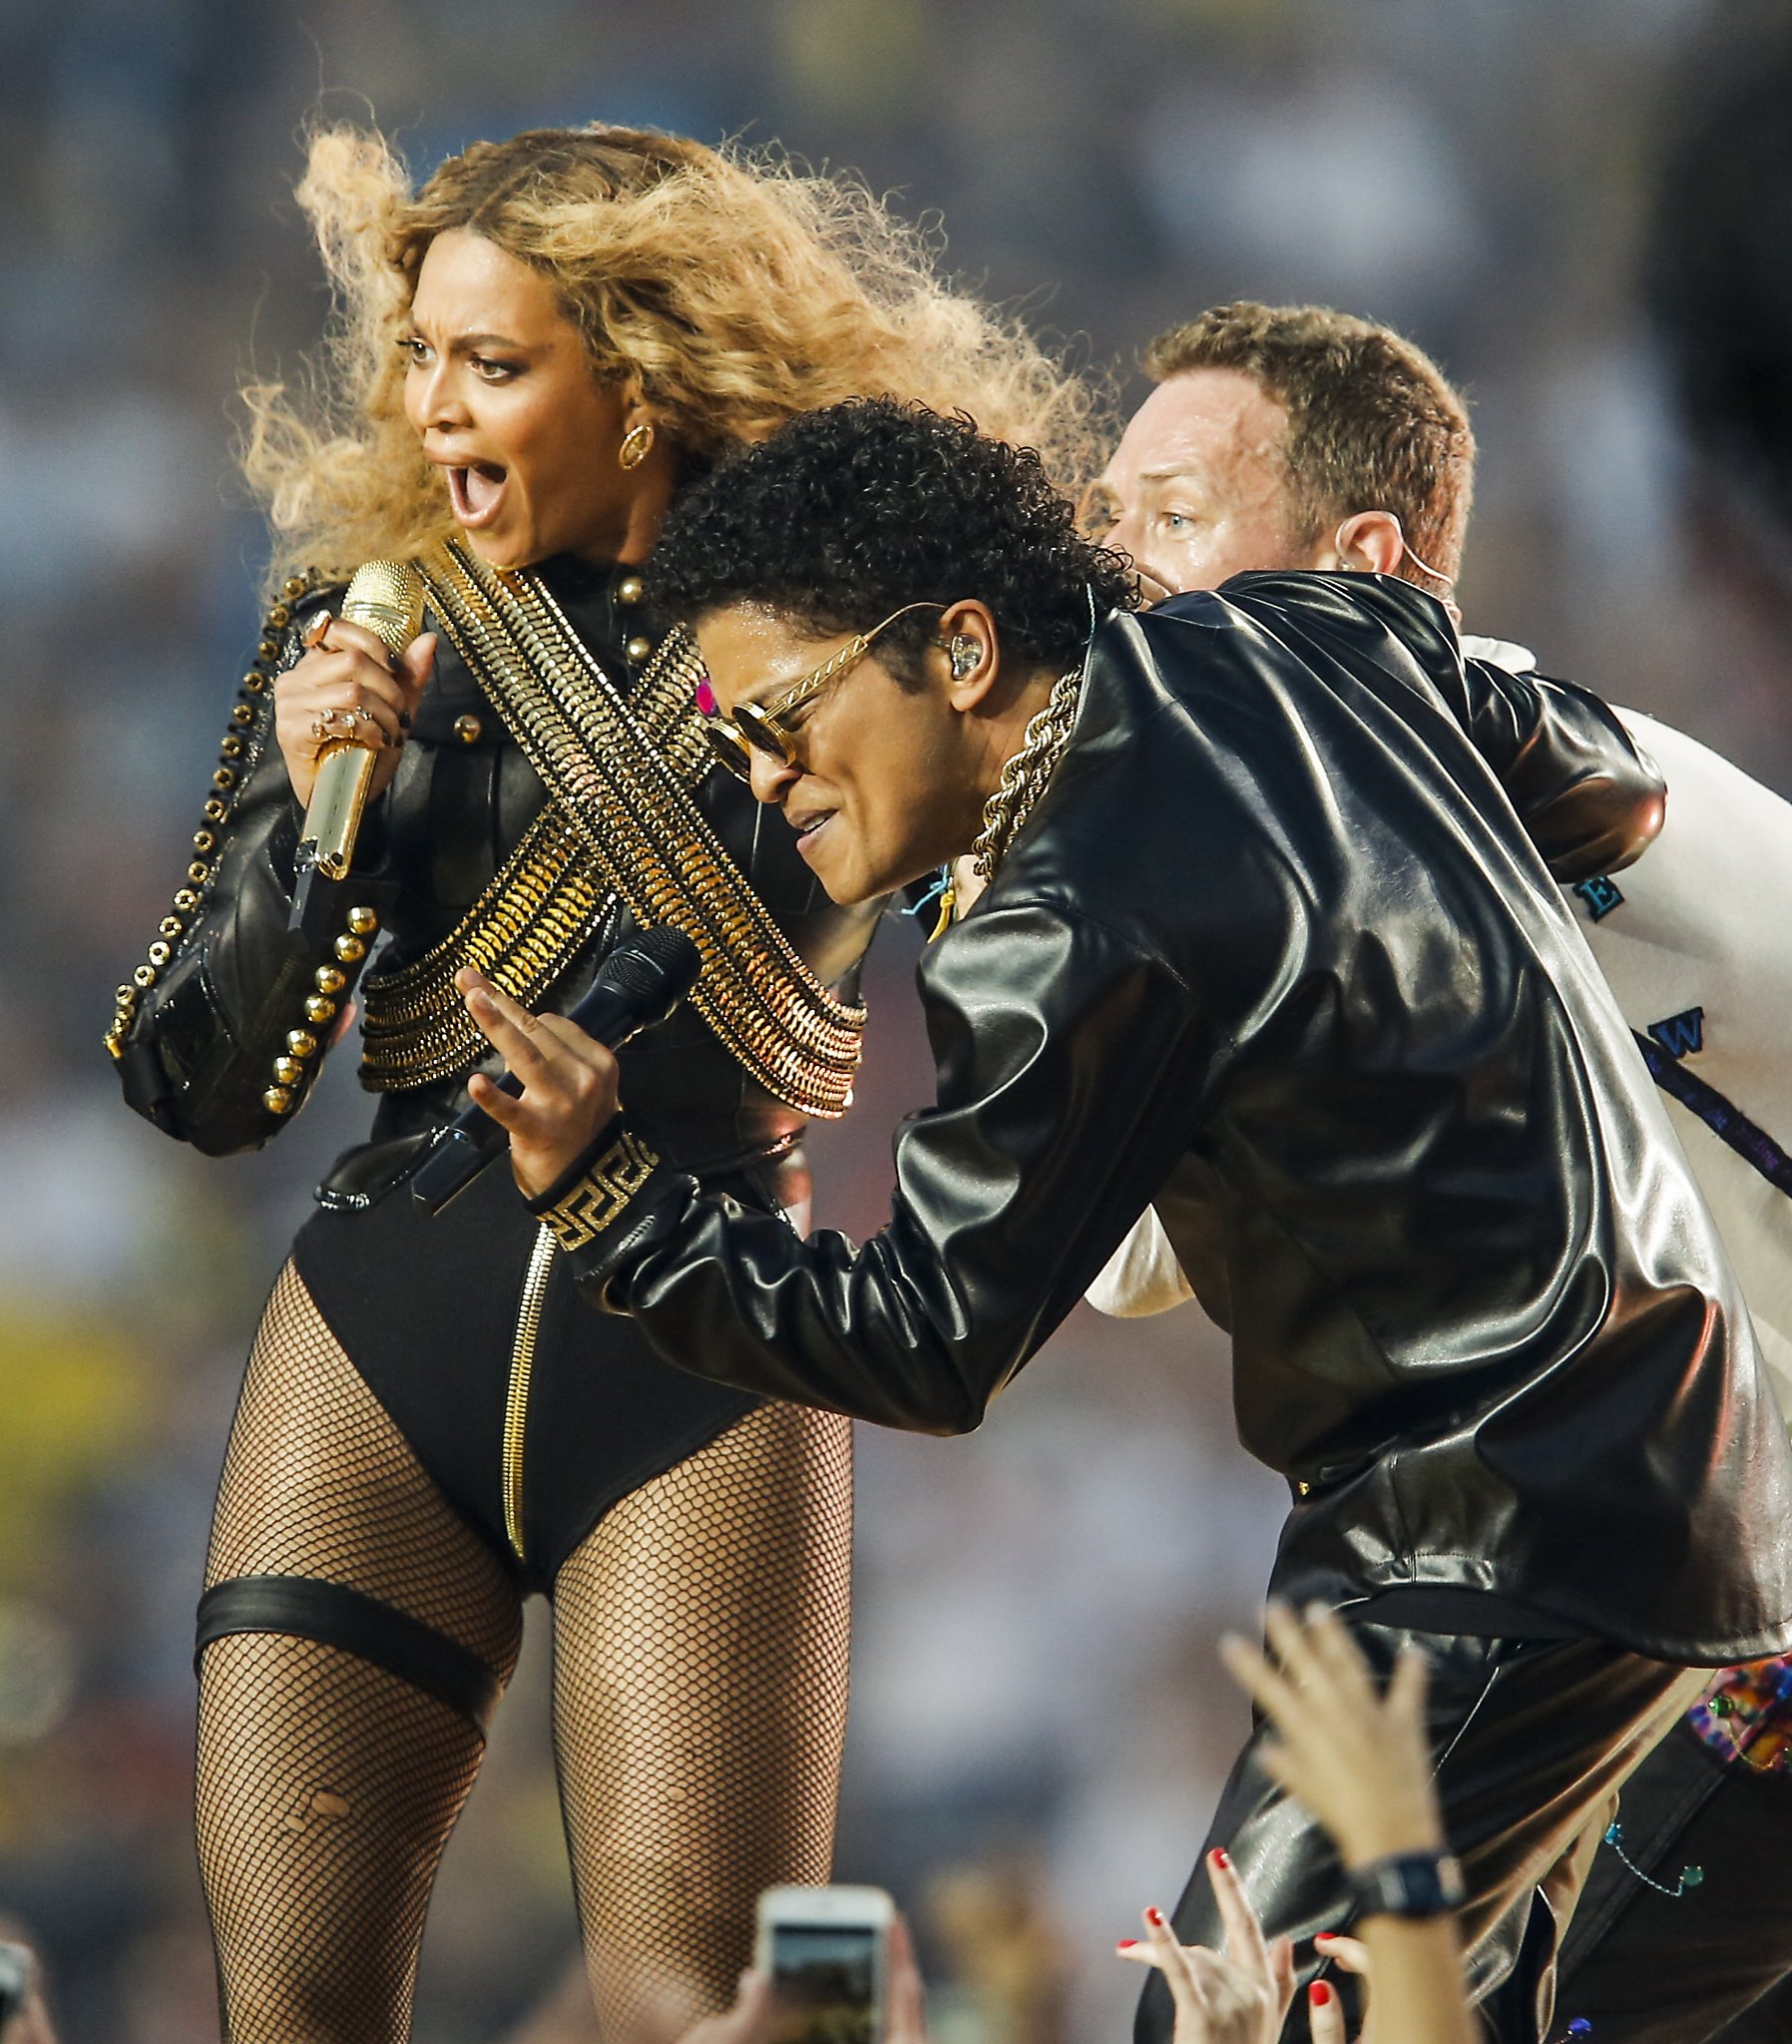 Celebs sound off on Super Bowl 50 and the halftime show.